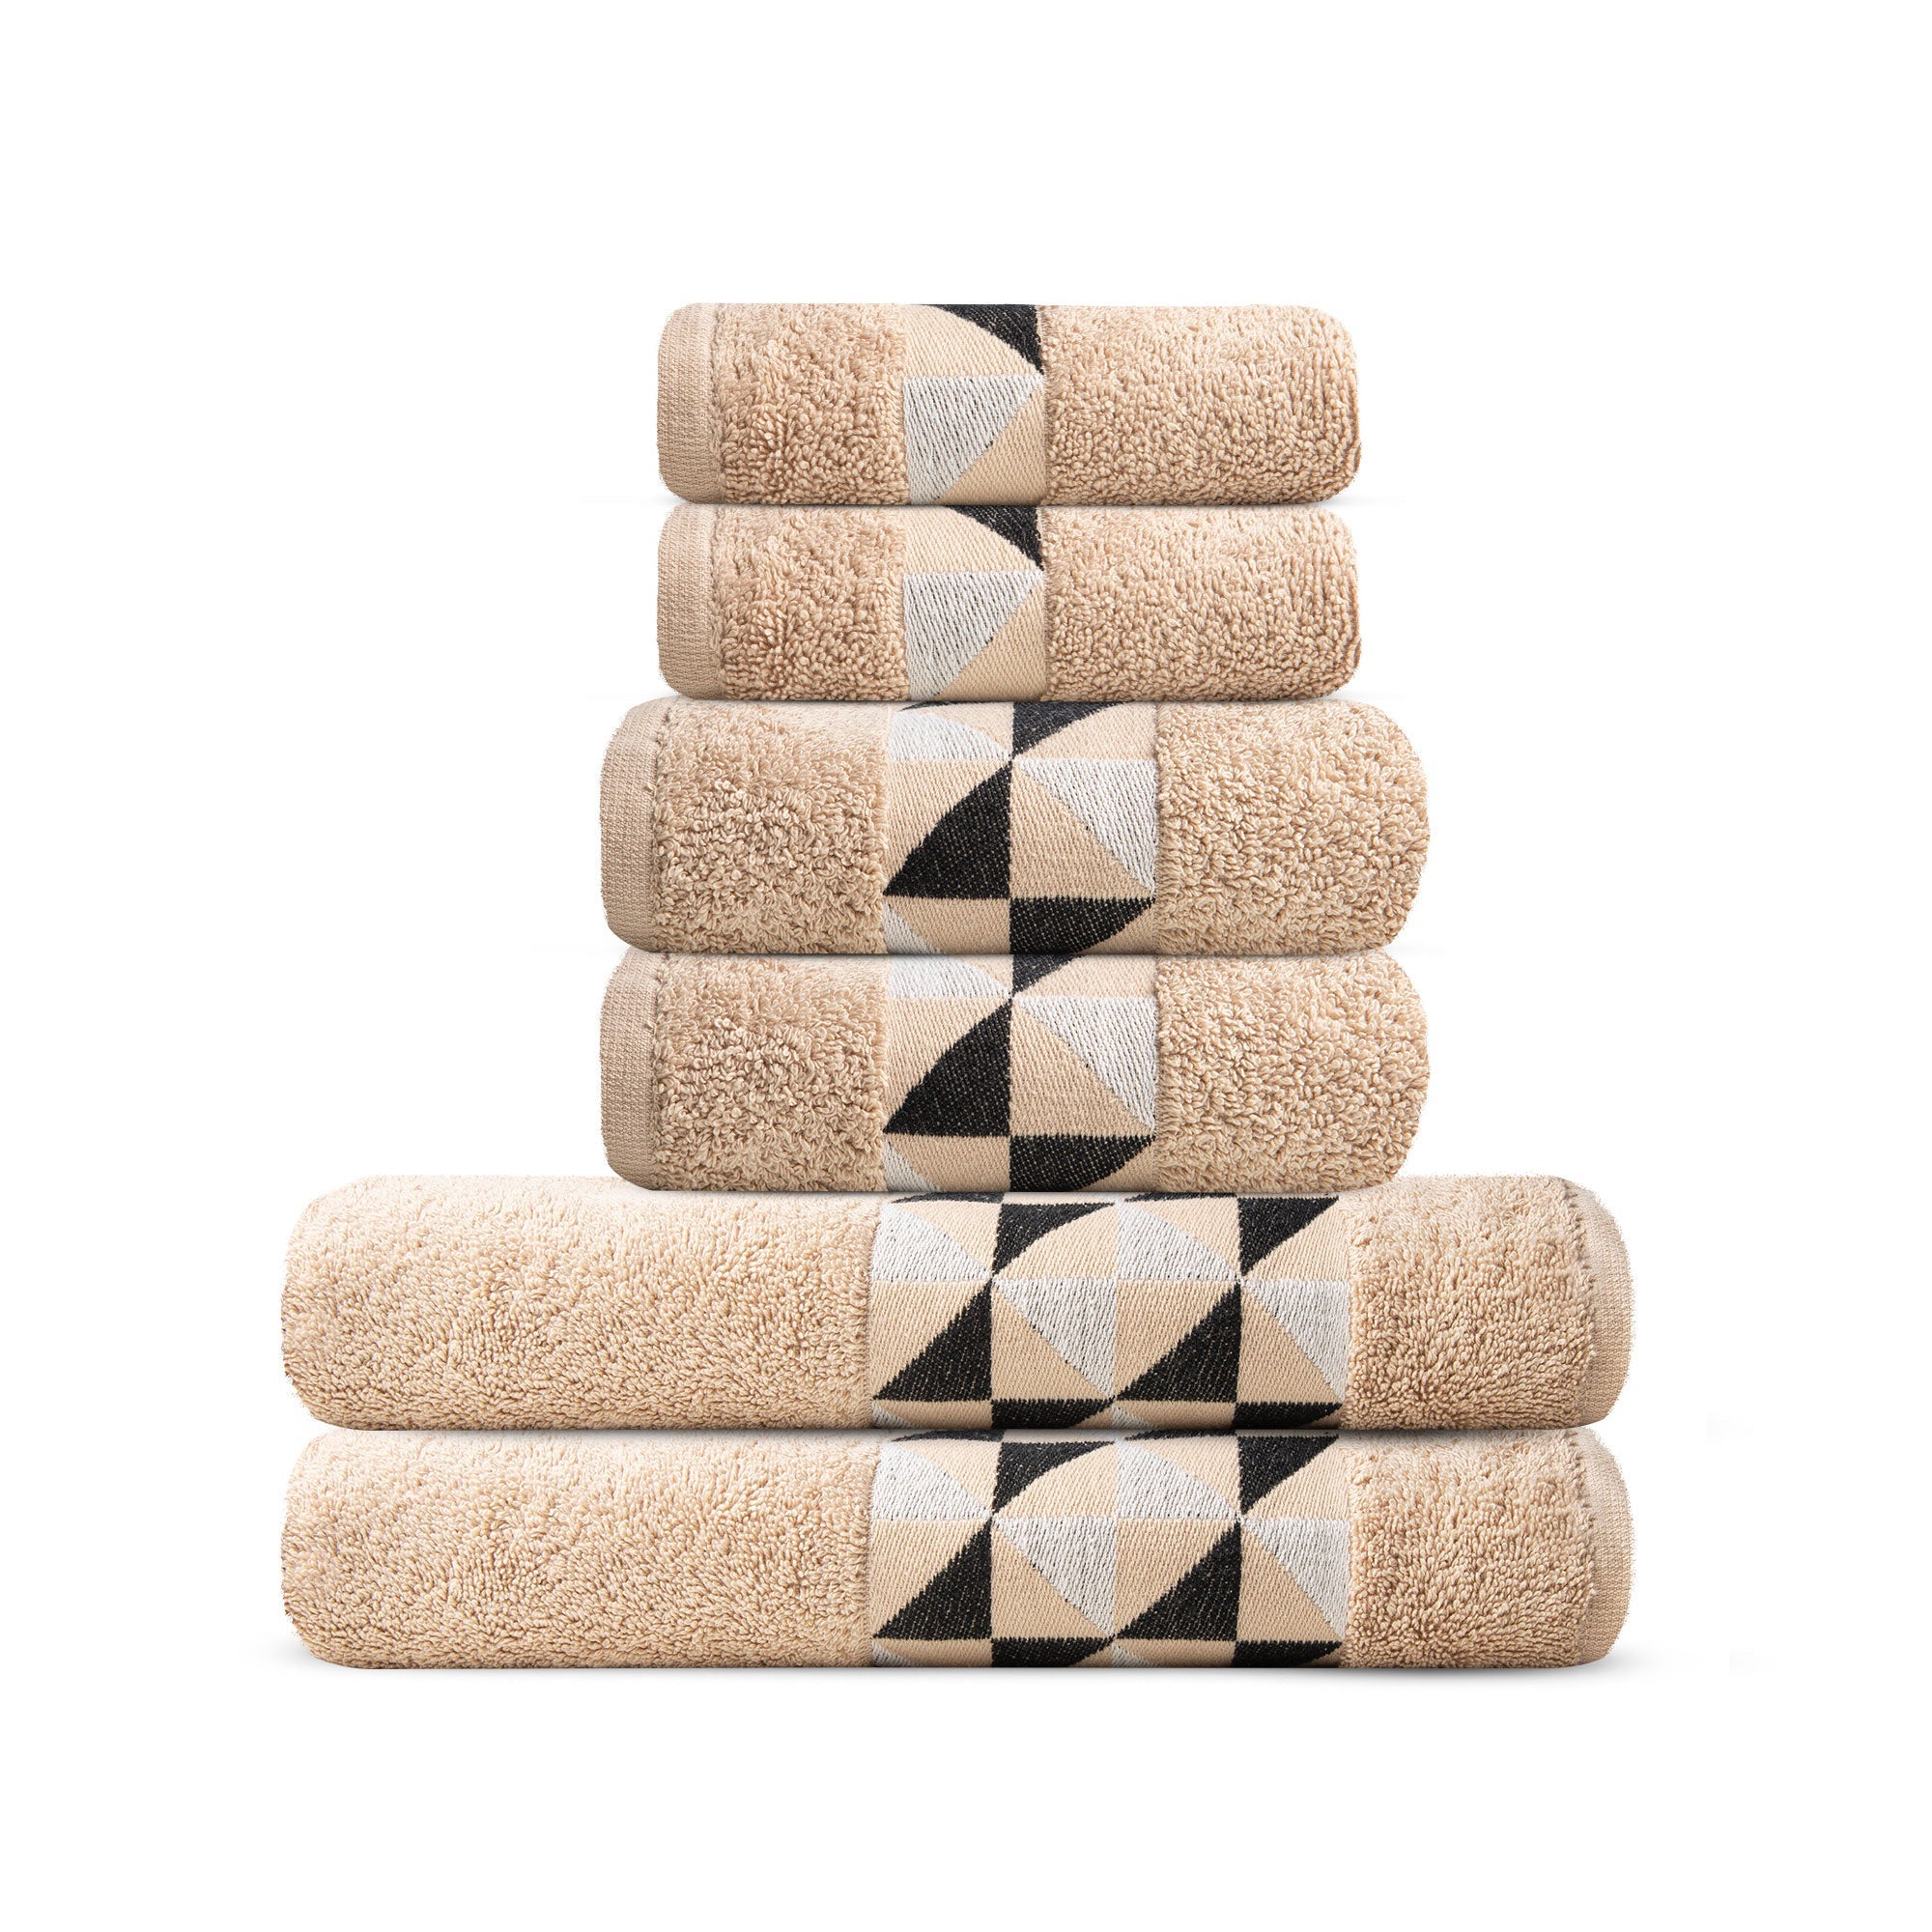 Buy one 6 Piece Towel Set and Get one Set FREE - 650GSM - 100% Premium Cotton